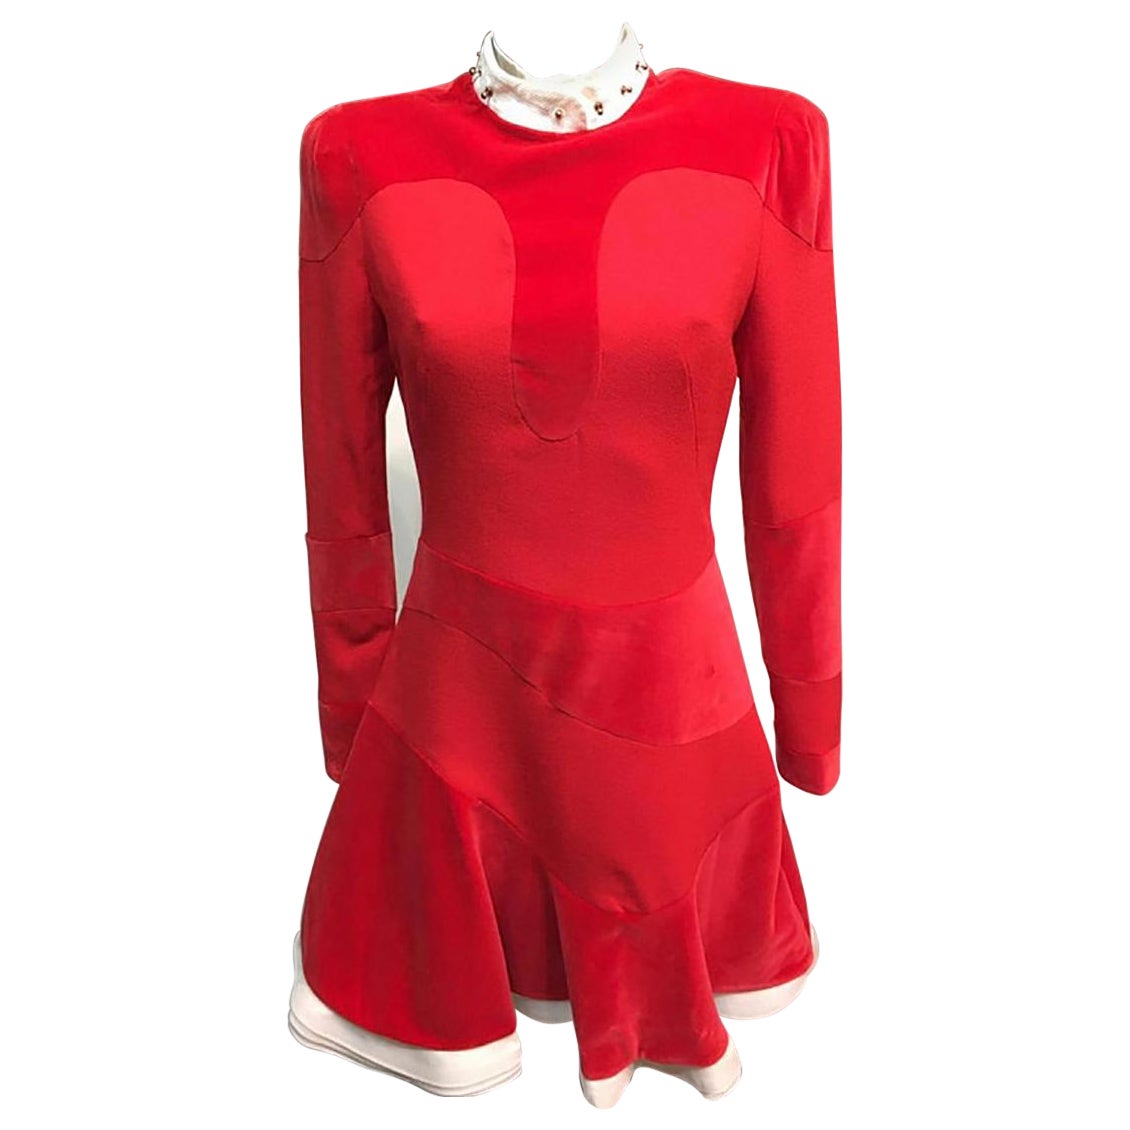 NEW ALEXANDER McQueen RED SHORT DRESS w/ WHITE COLLAR and TRIM size 40 - 4